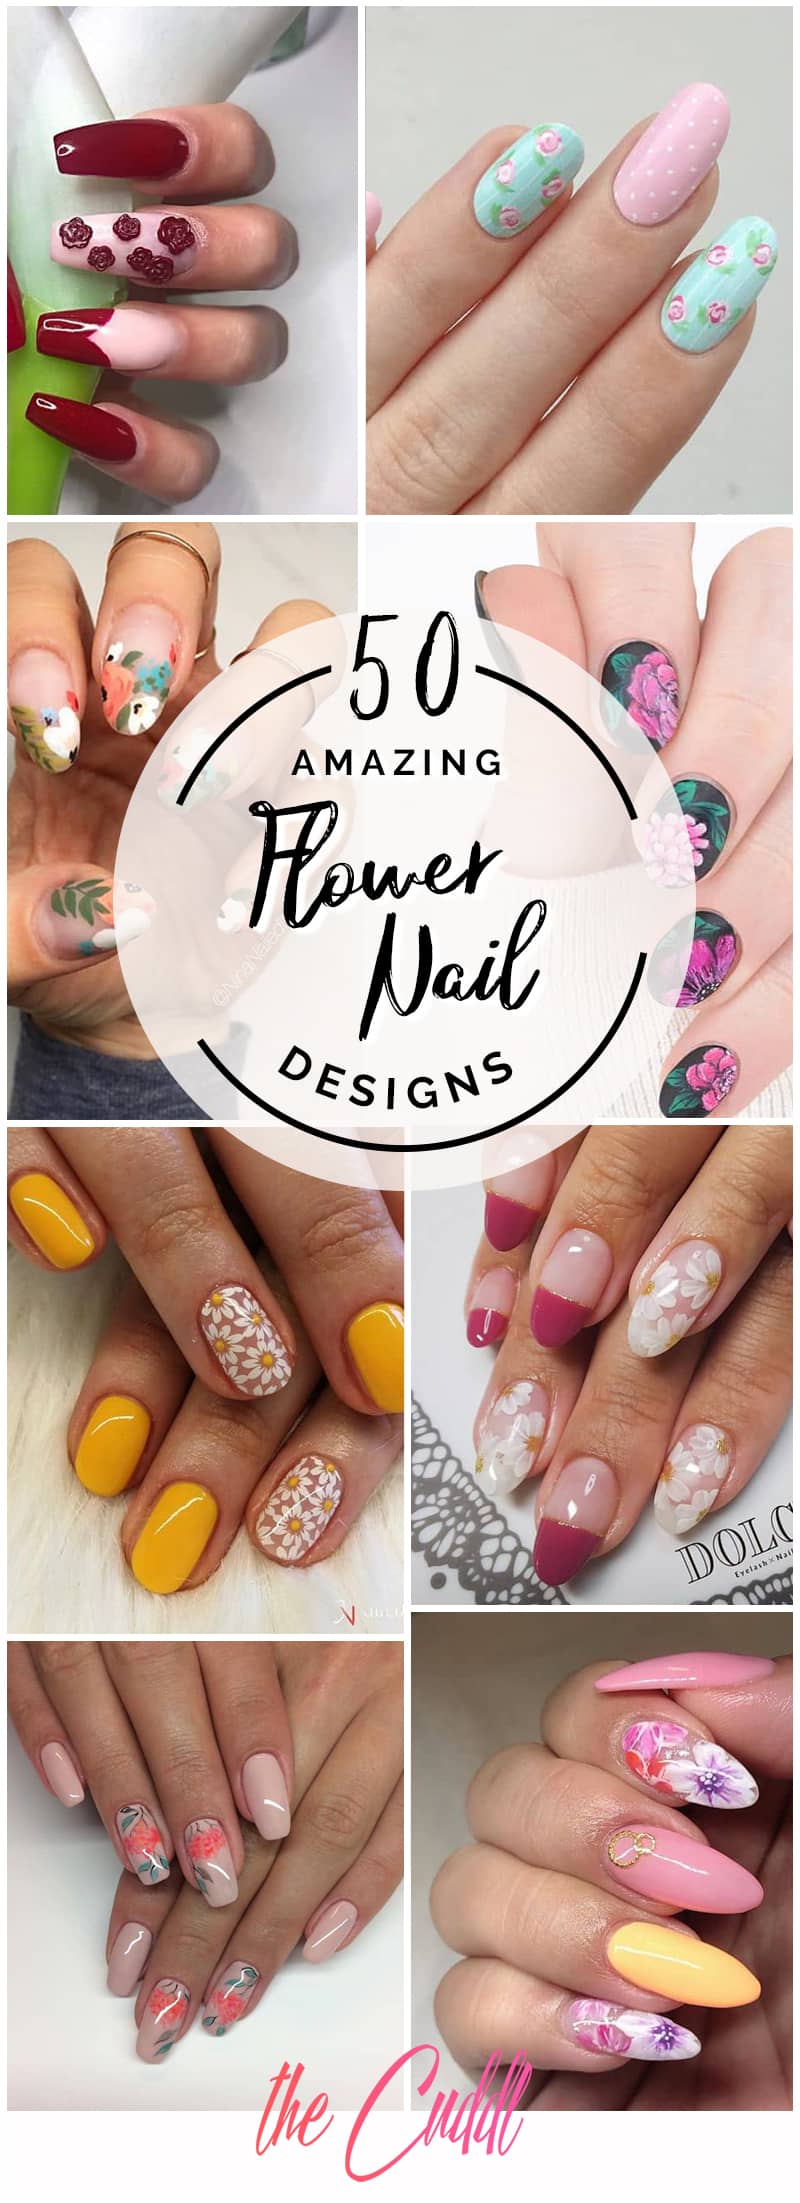 50 Cool Flower Nail Design Ideas to Spice Up Your Look